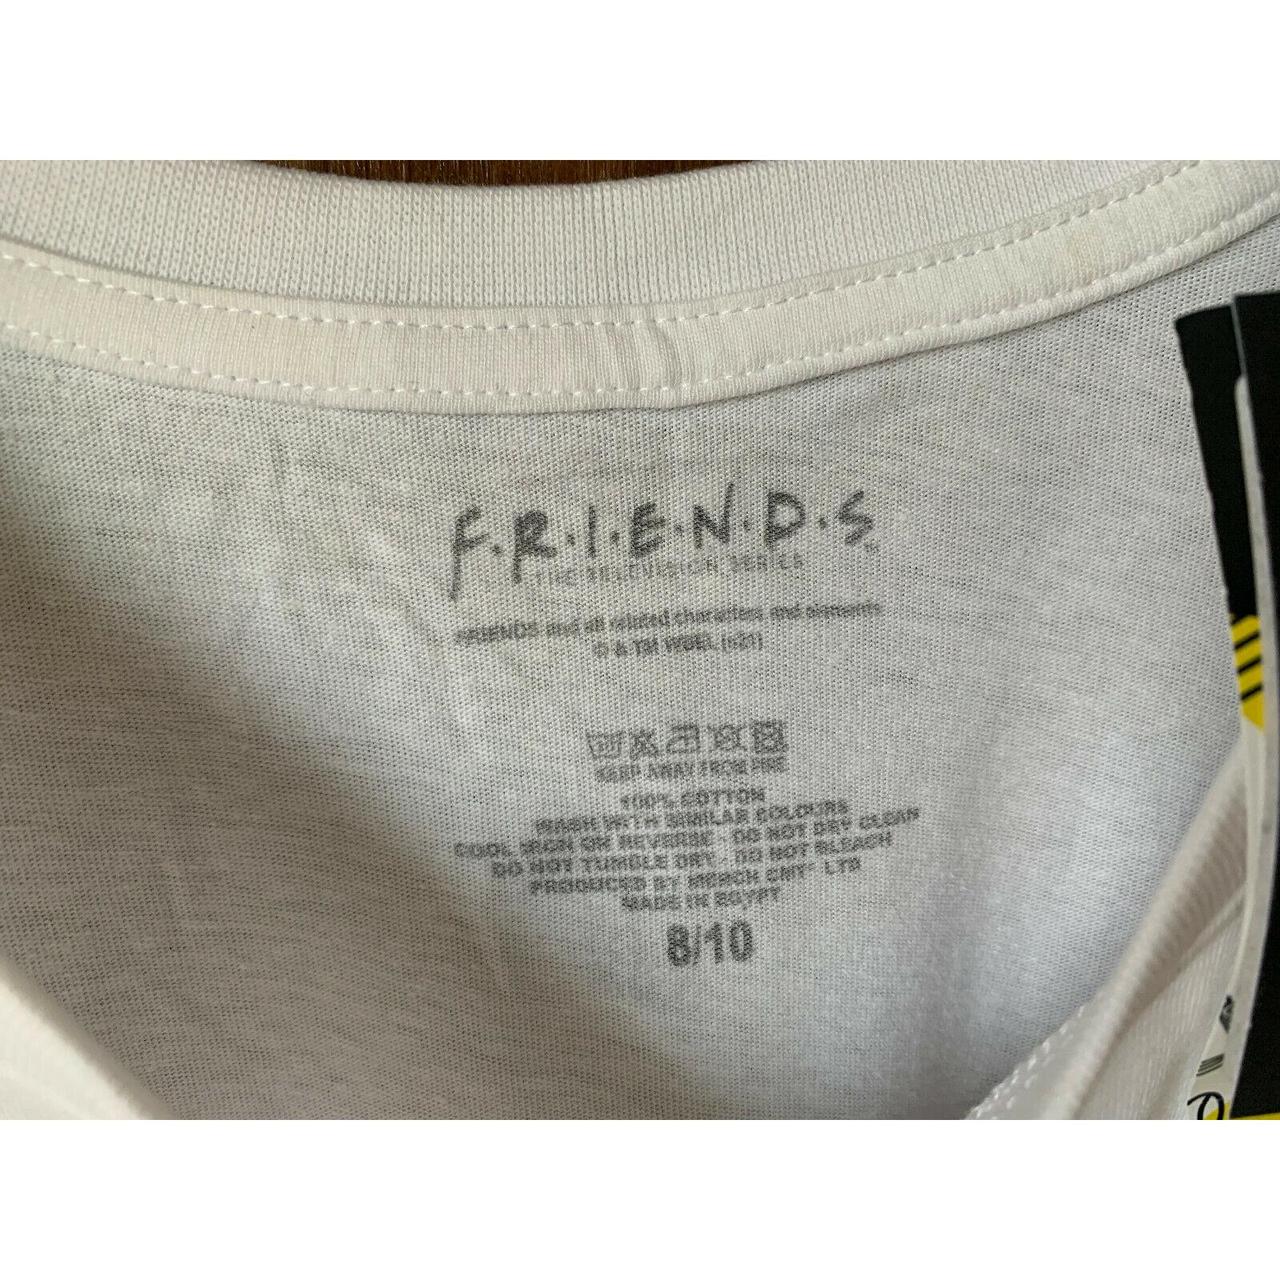 Product Image 3 - BNWT - FRIENDS CHRISTMAS T-SHIRT